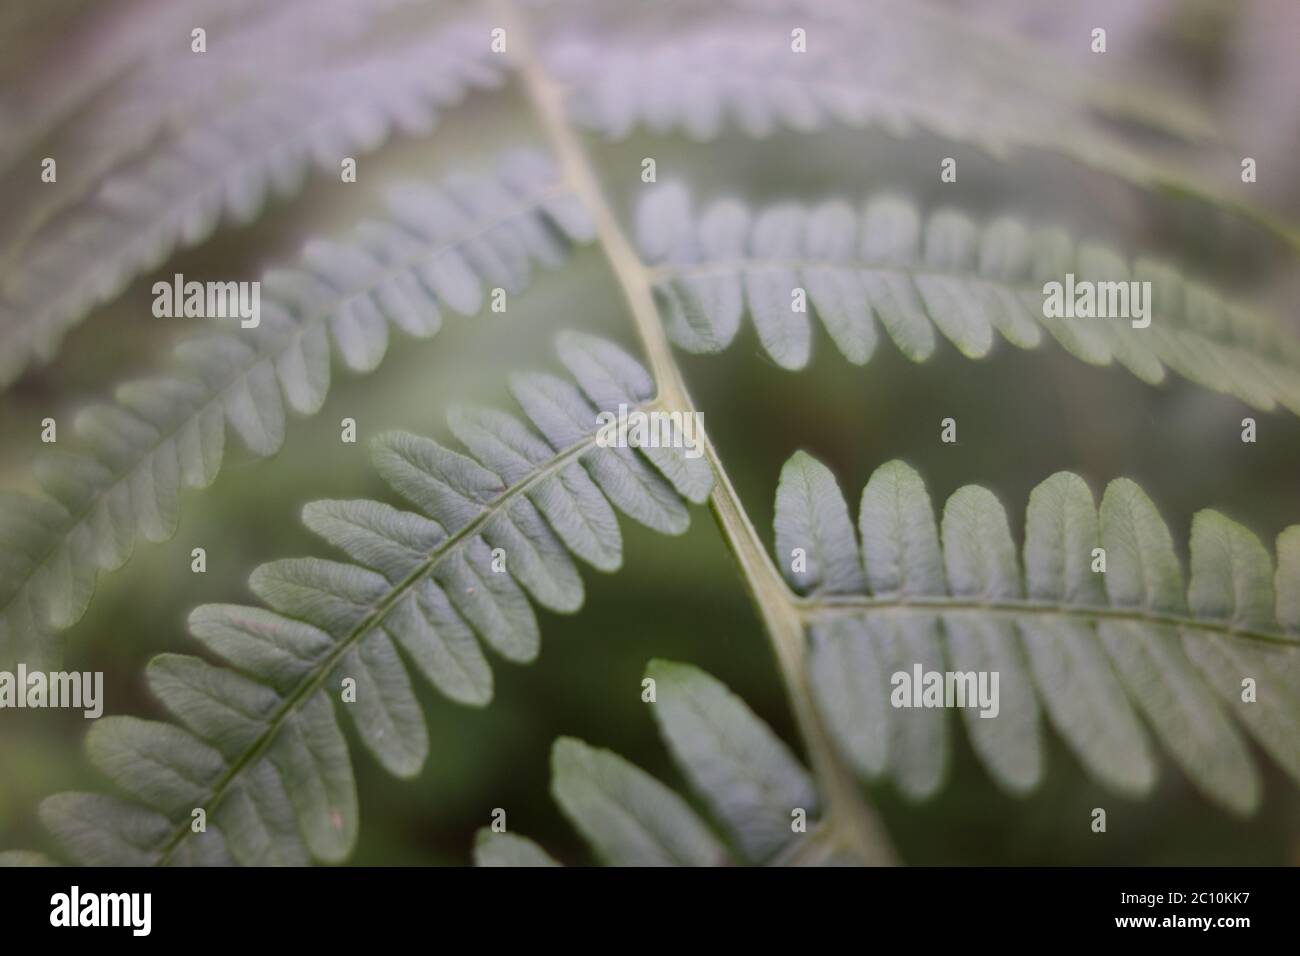 A rounded leaf fern in diffuse lighting Stock Photo